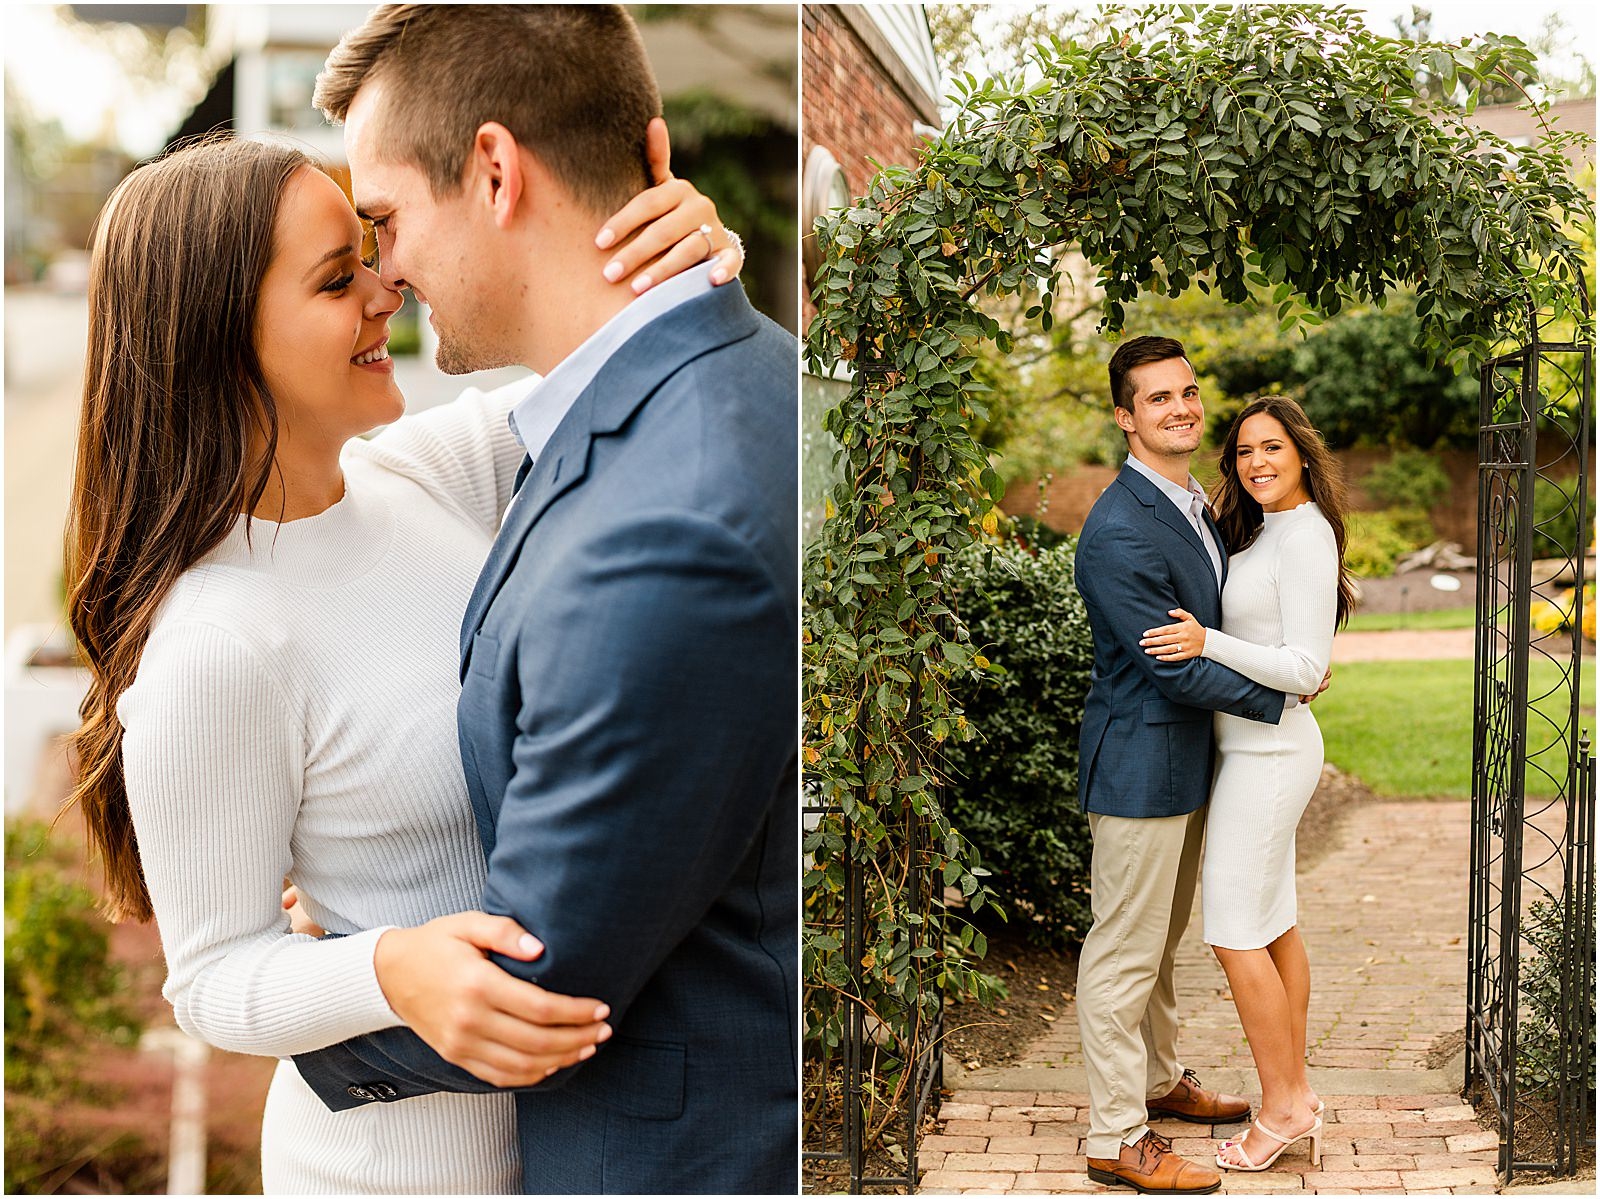 Emma and Jace's Downtown Newburgh Engagement Session | Bret and Brandie Photography | Evansville Indiana Wedding Photographers_0004.jpg